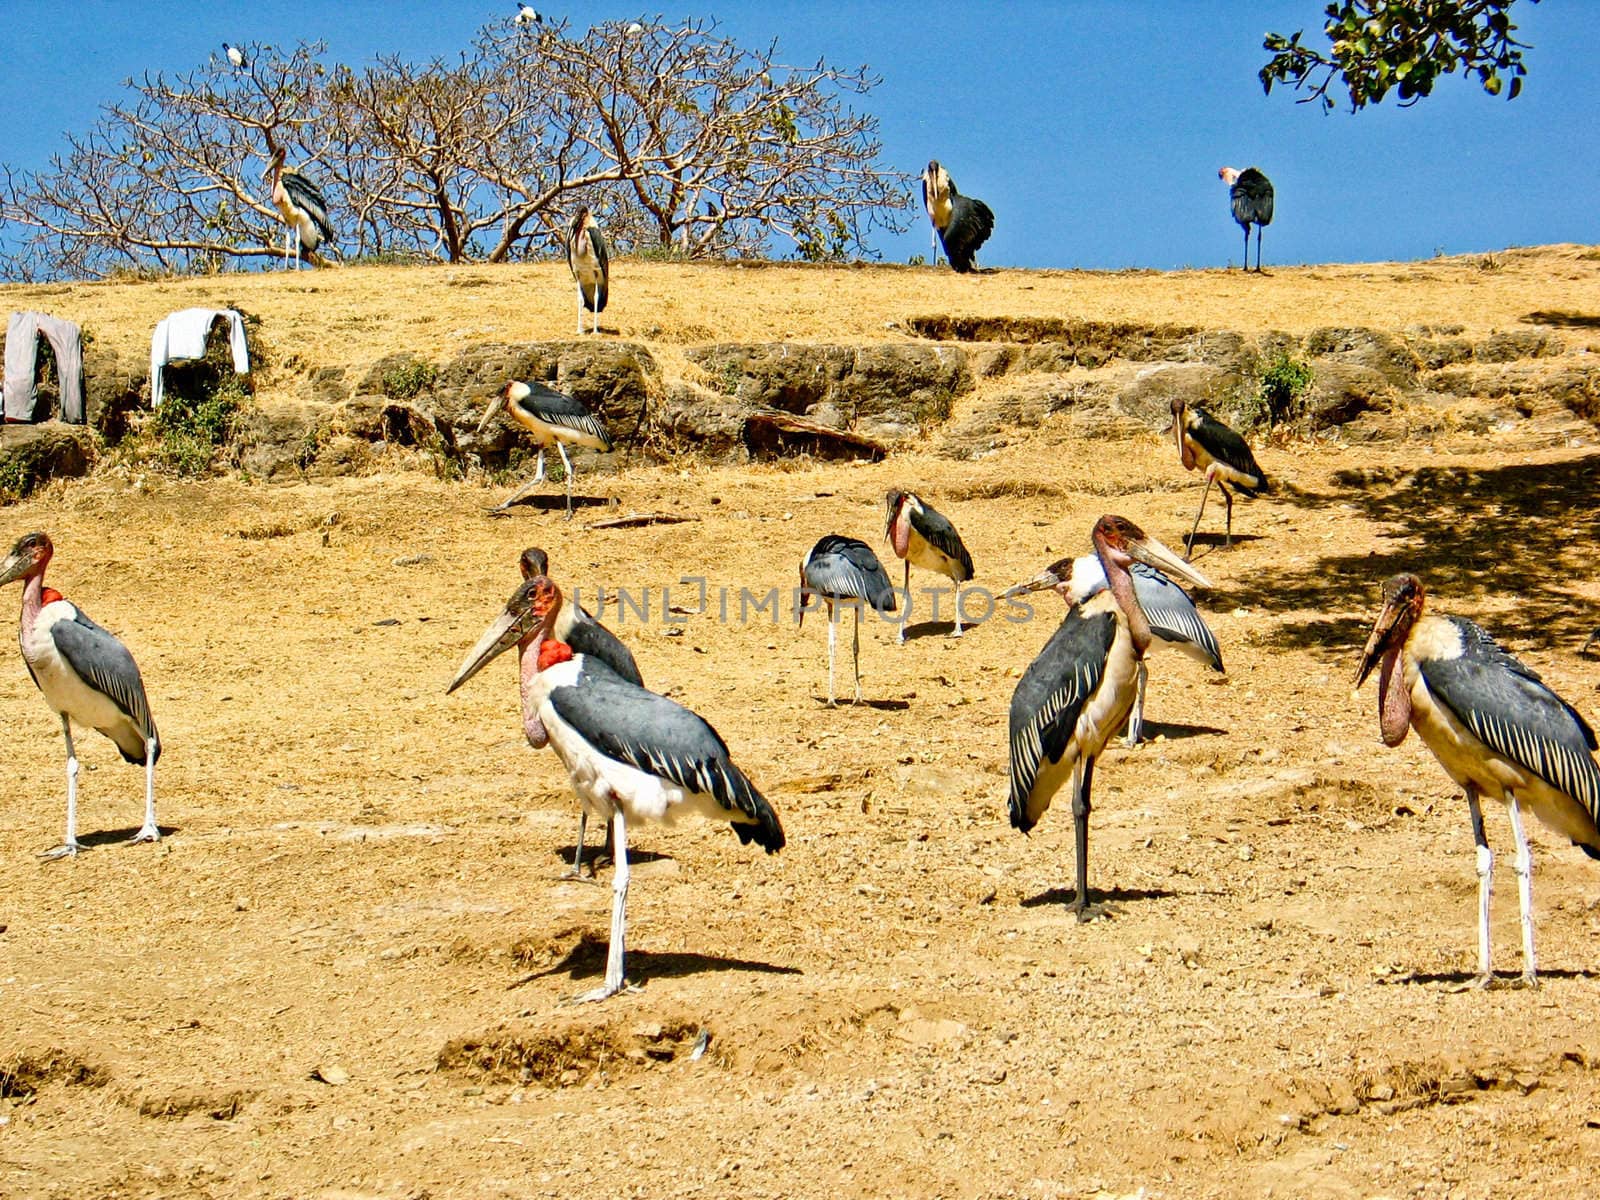 Marabou Storks gathered around the shores of Hawassa lake looking for leftover fish from the fishermen.